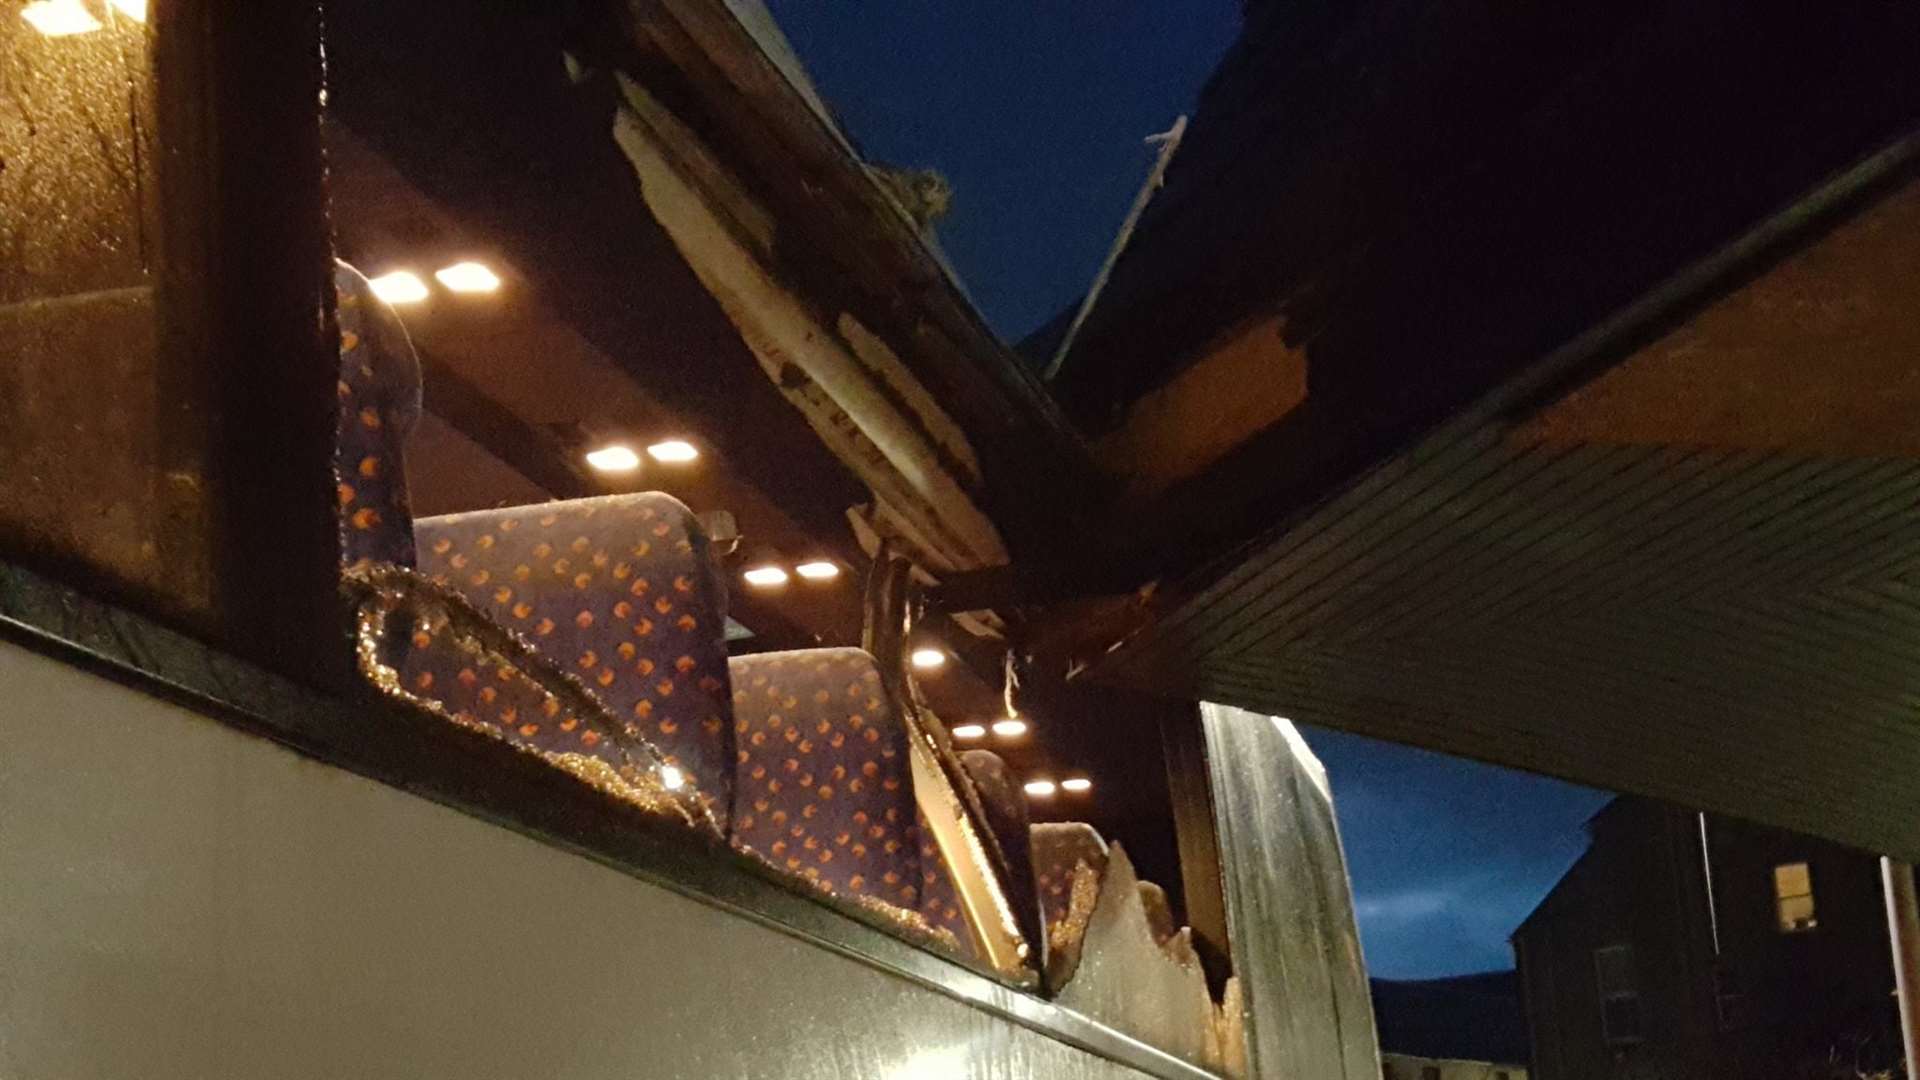 Windows of the Stagecoach bus were smashed in after the crash.